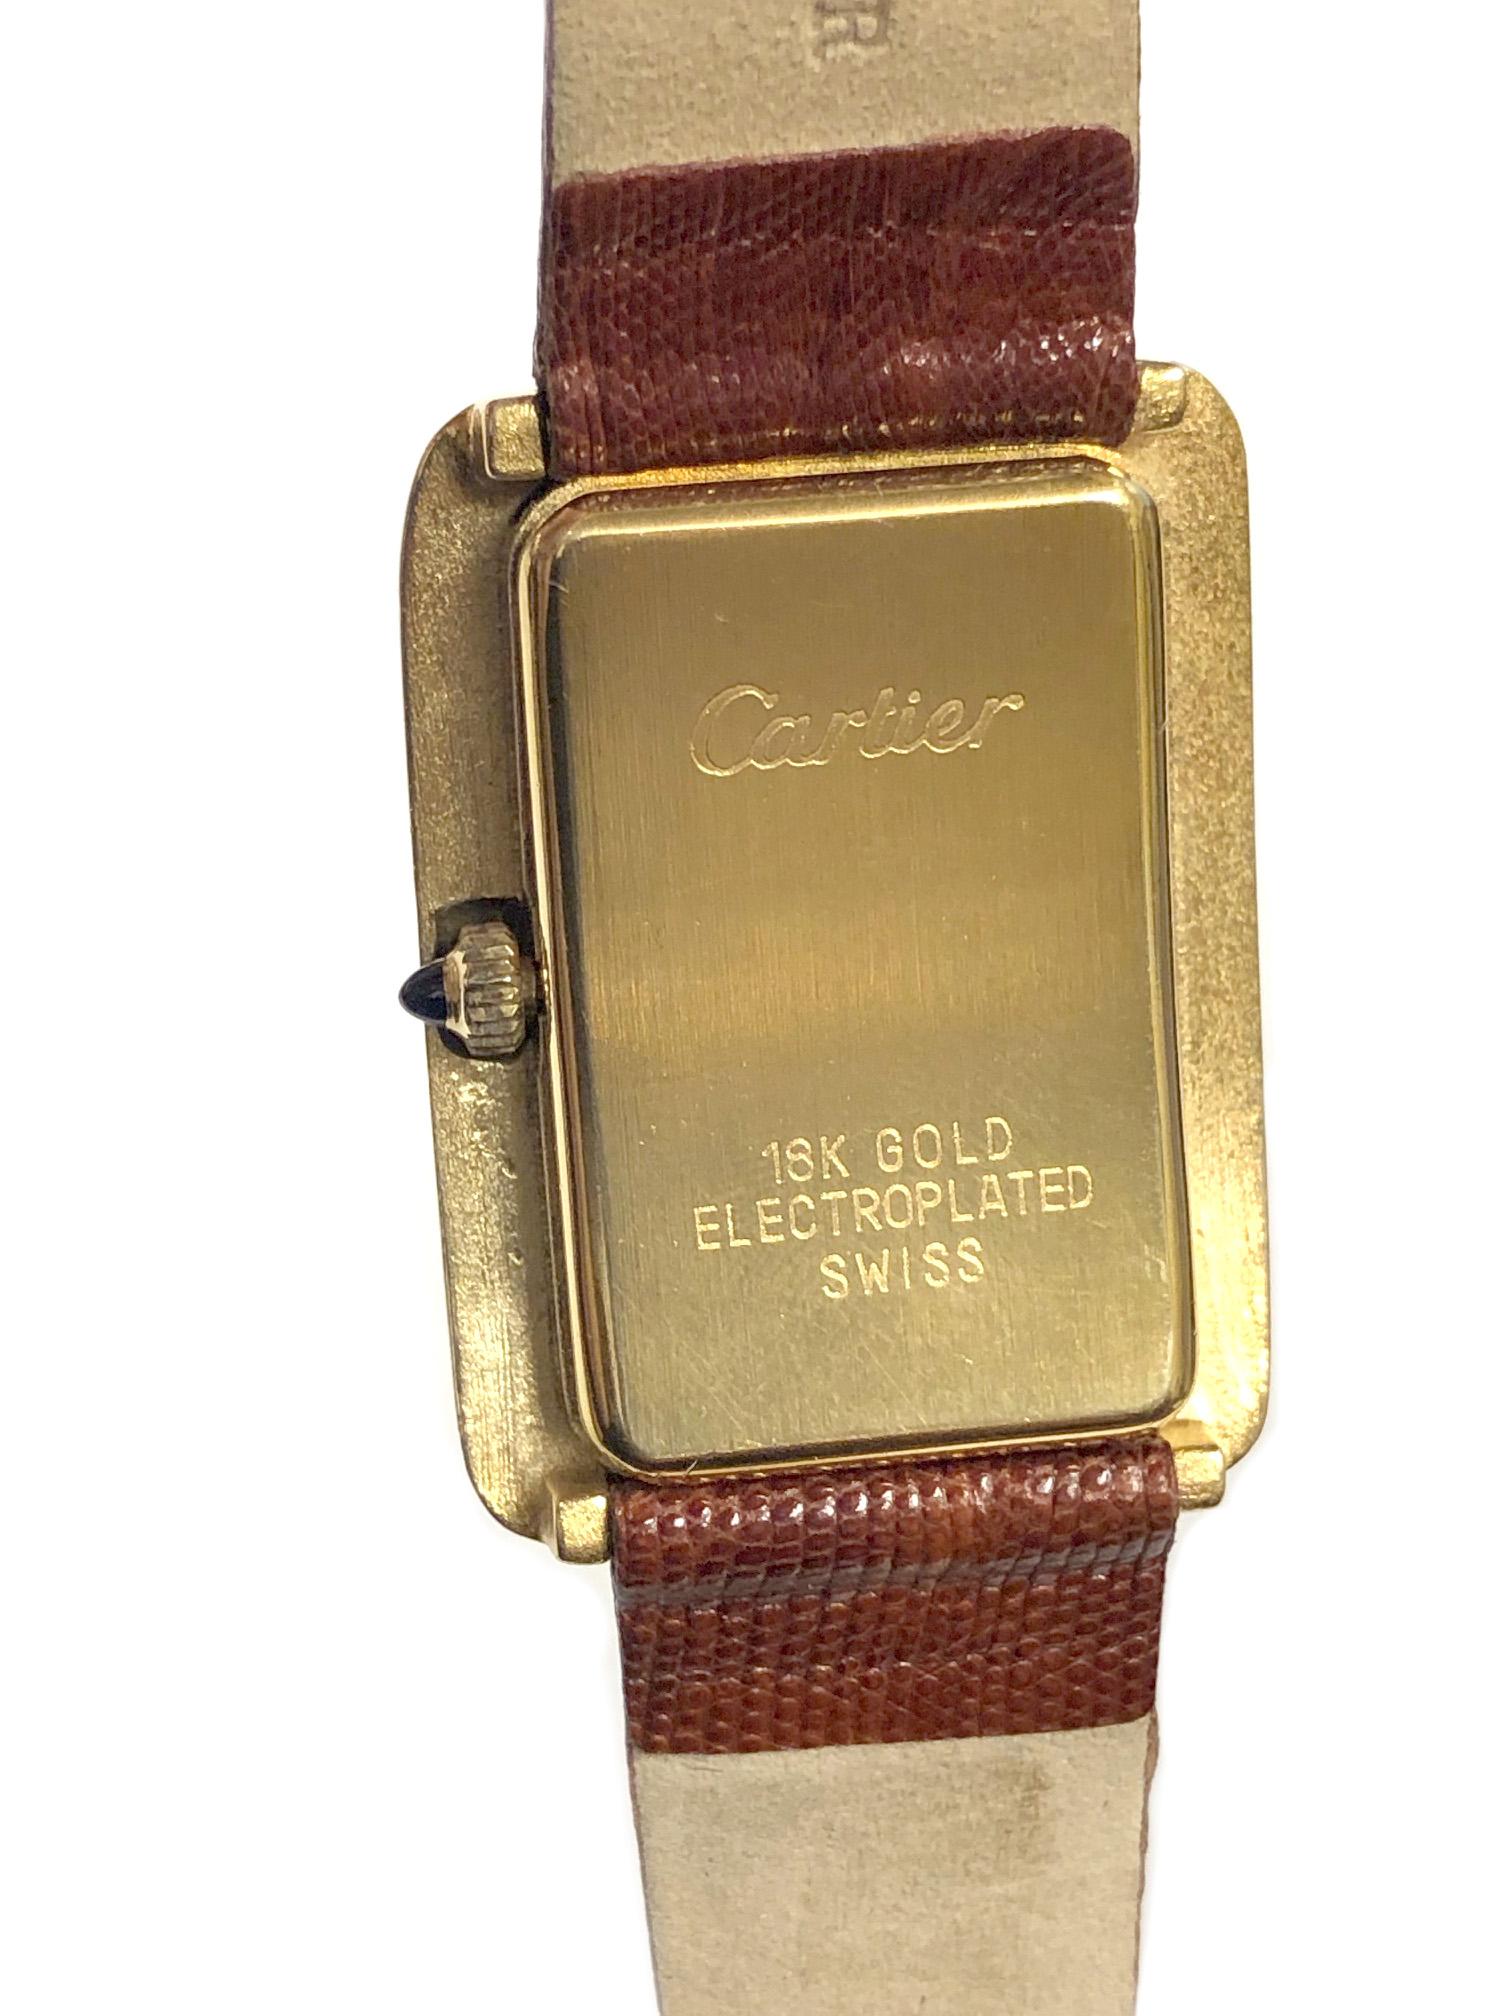 Circa 1970s Cartier Wrist Watch, 37 X 27 MM Yellow Gold Plated Stepped Case, 17 Jewel Mechanical, Manual Wind Movement, Chocolate Brown Dial with Gold Roman Numerals, Sapphire Crown. New Brown Lizard Strap with original Cartier Gold Plate buckle.